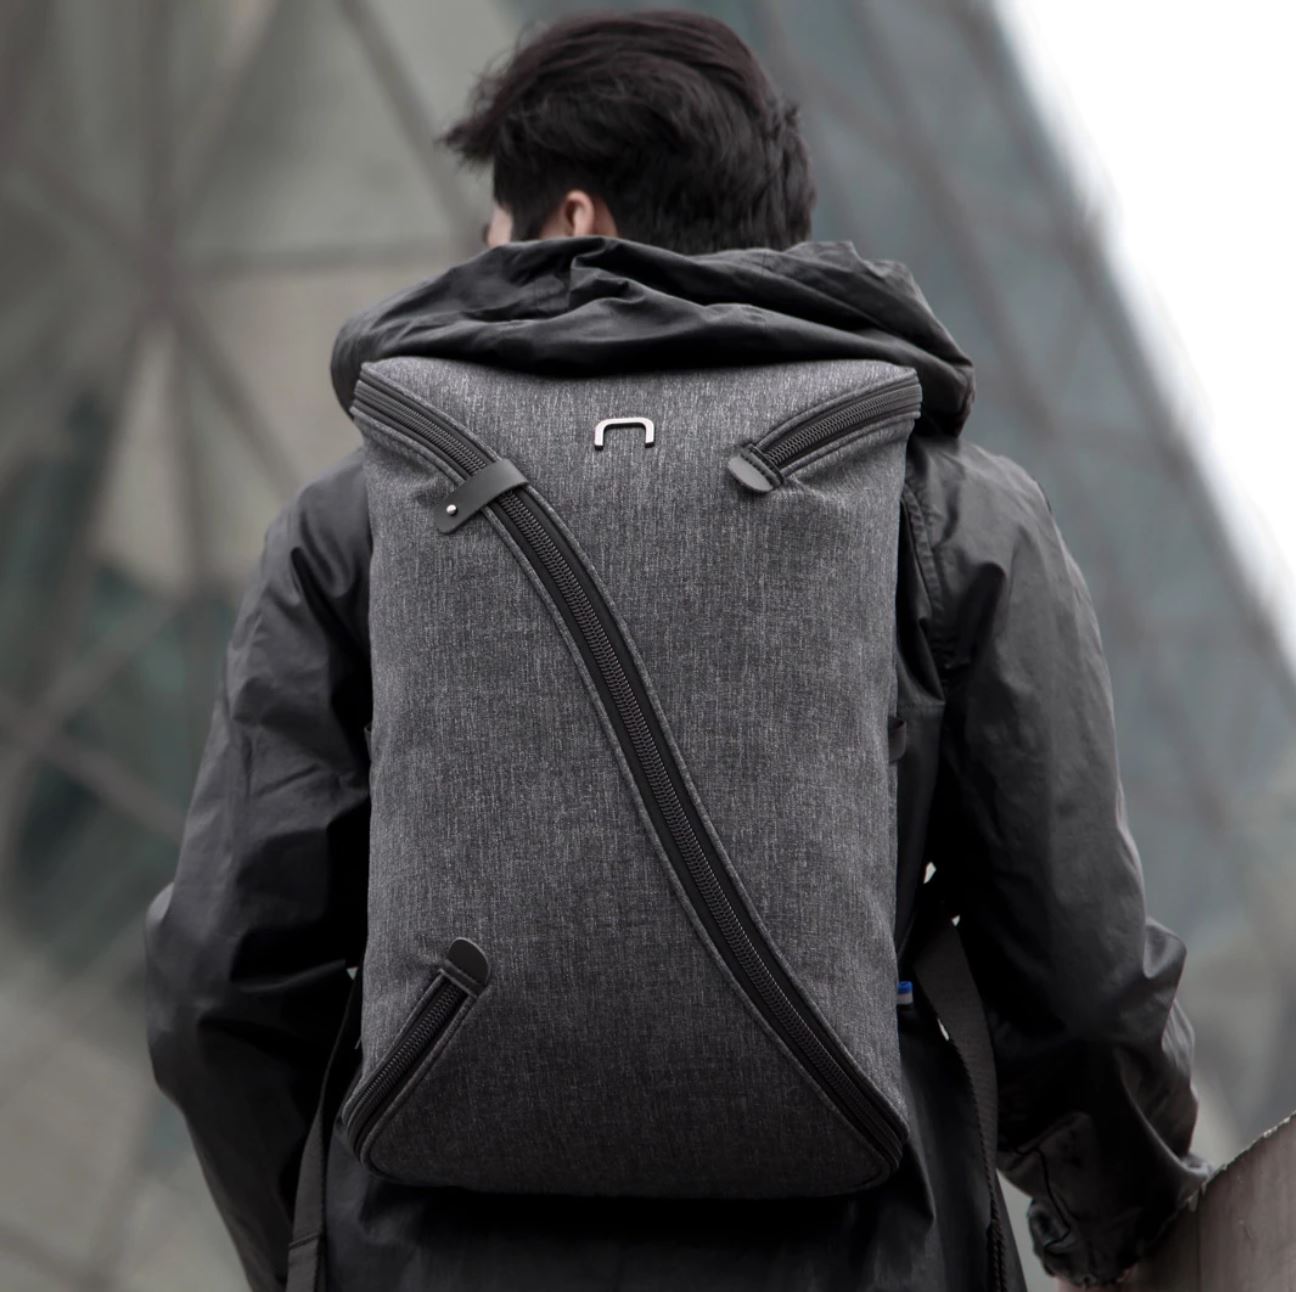 DECODE - A Simply Freaking Great Everyday Backpack by NIID — Kickstarter